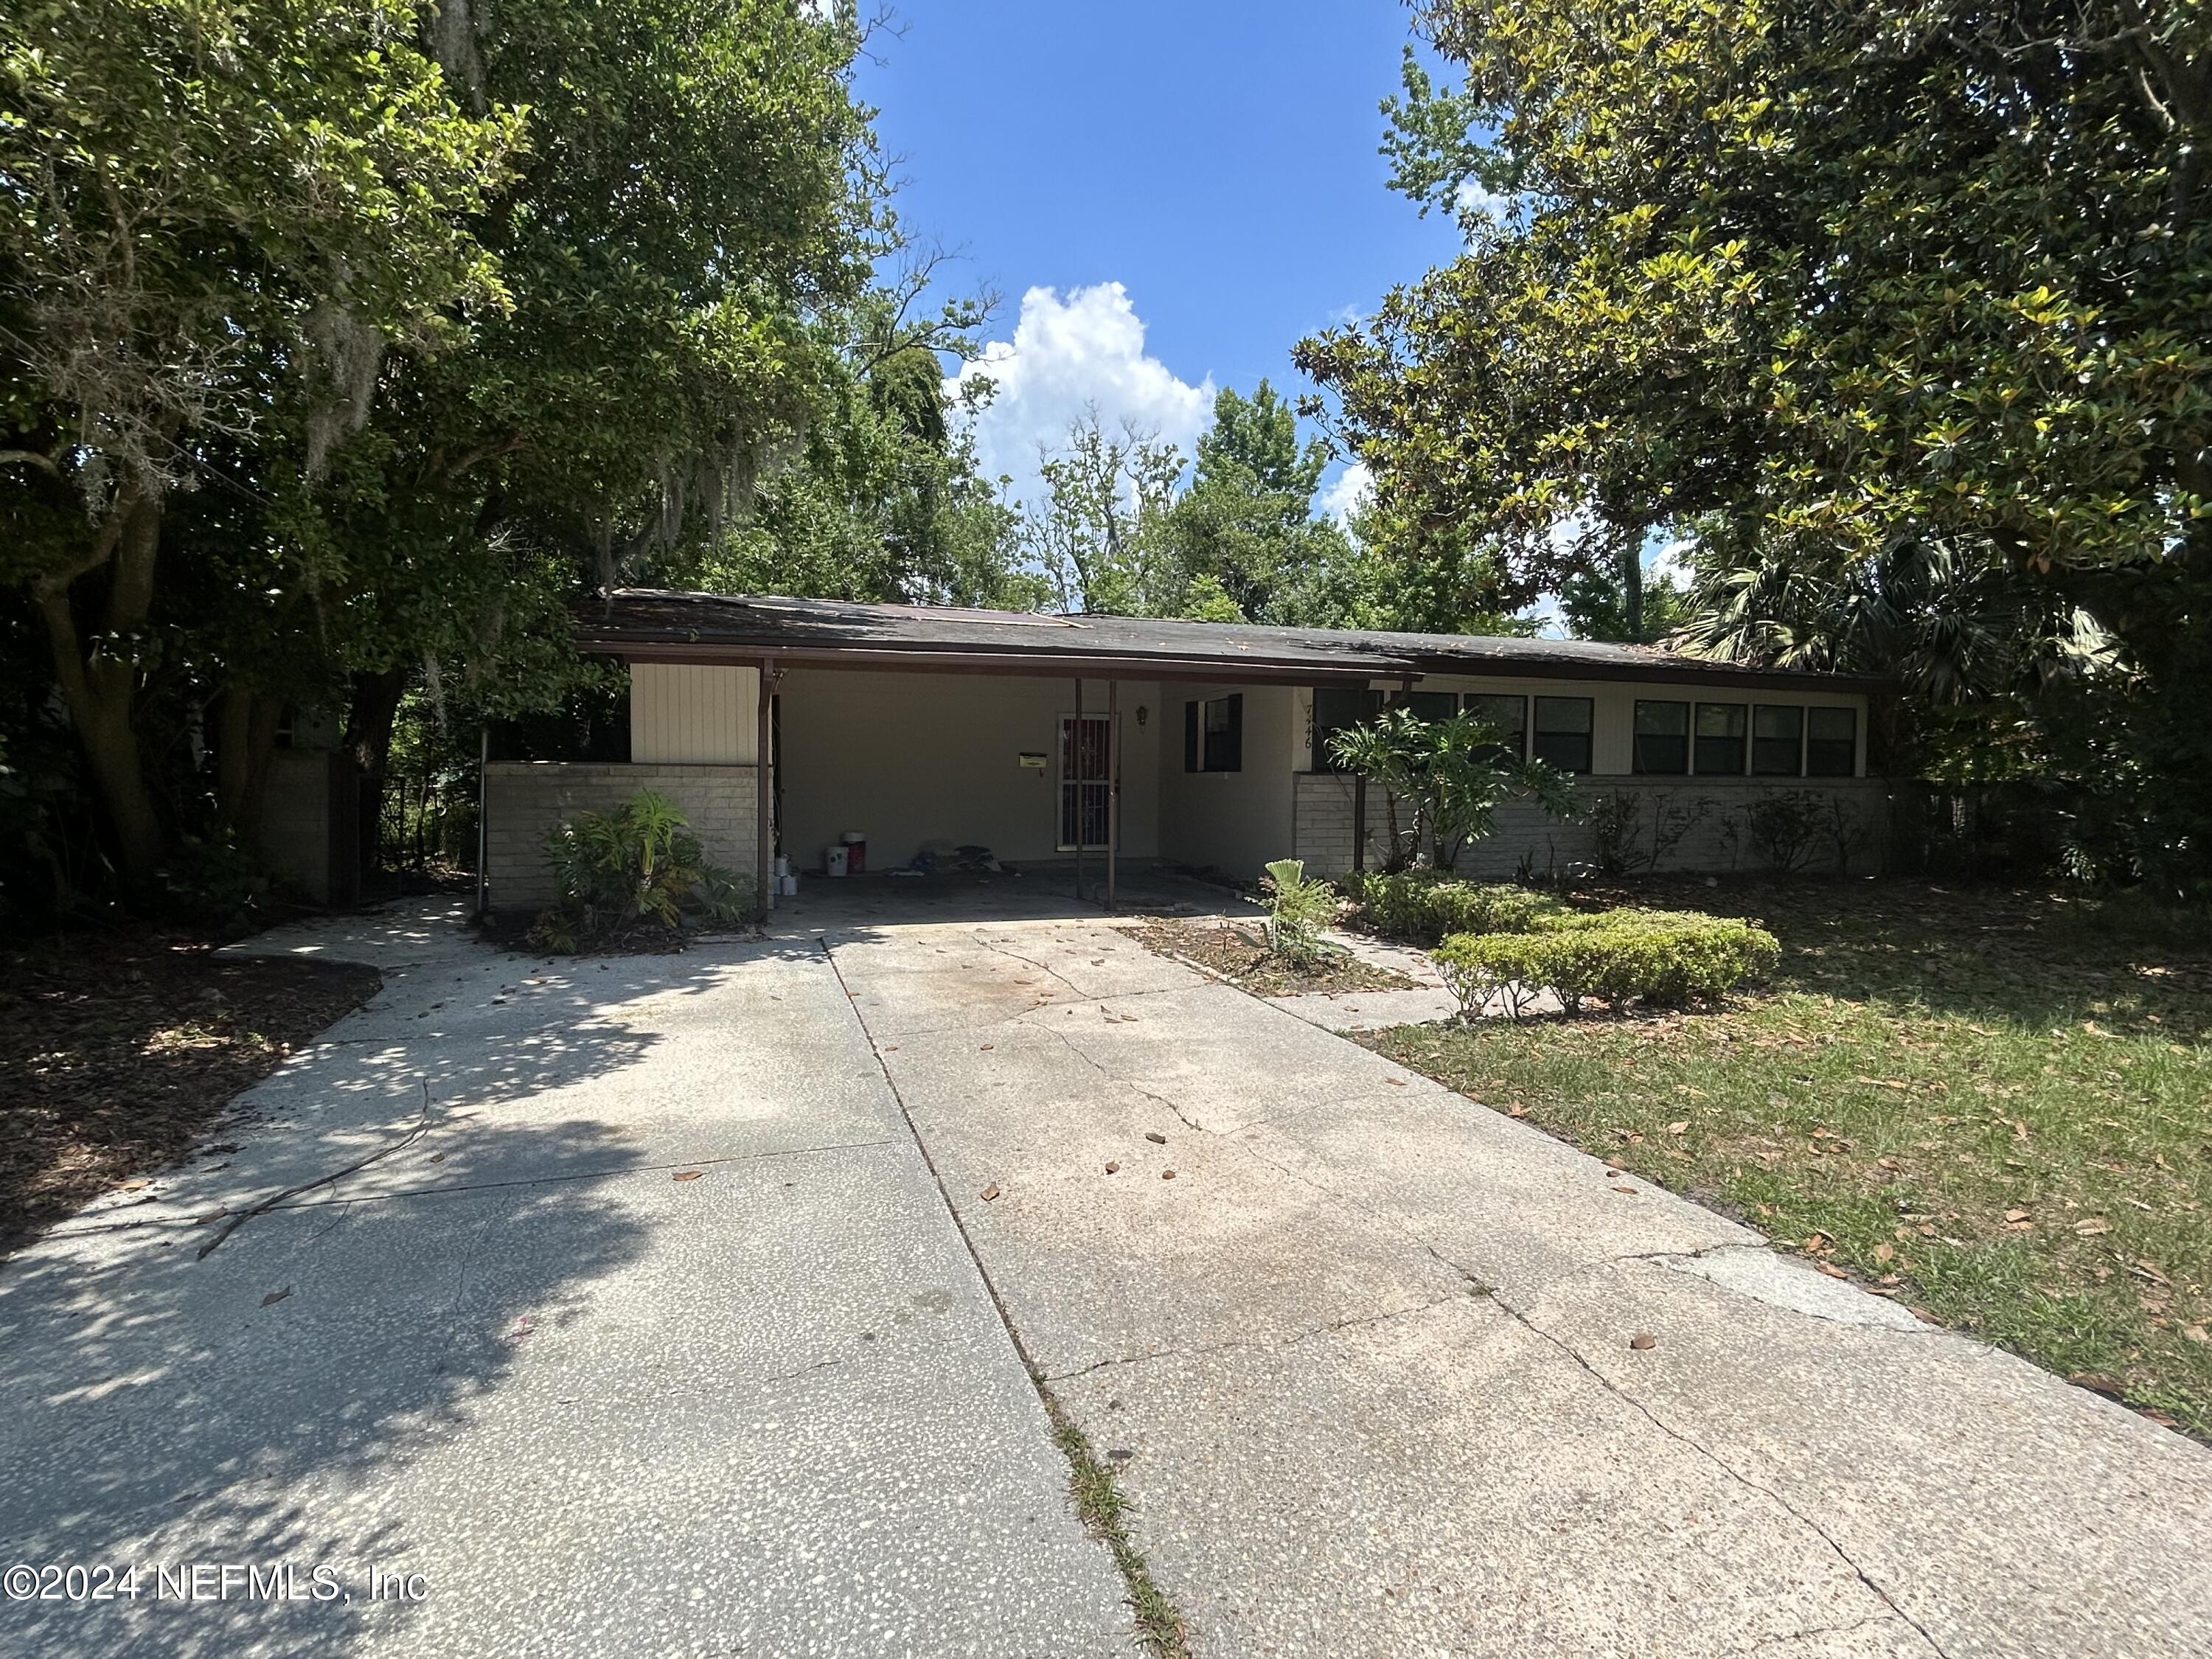 Jacksonville, FL home for sale located at 7446 Spinola Road, Jacksonville, FL 32217